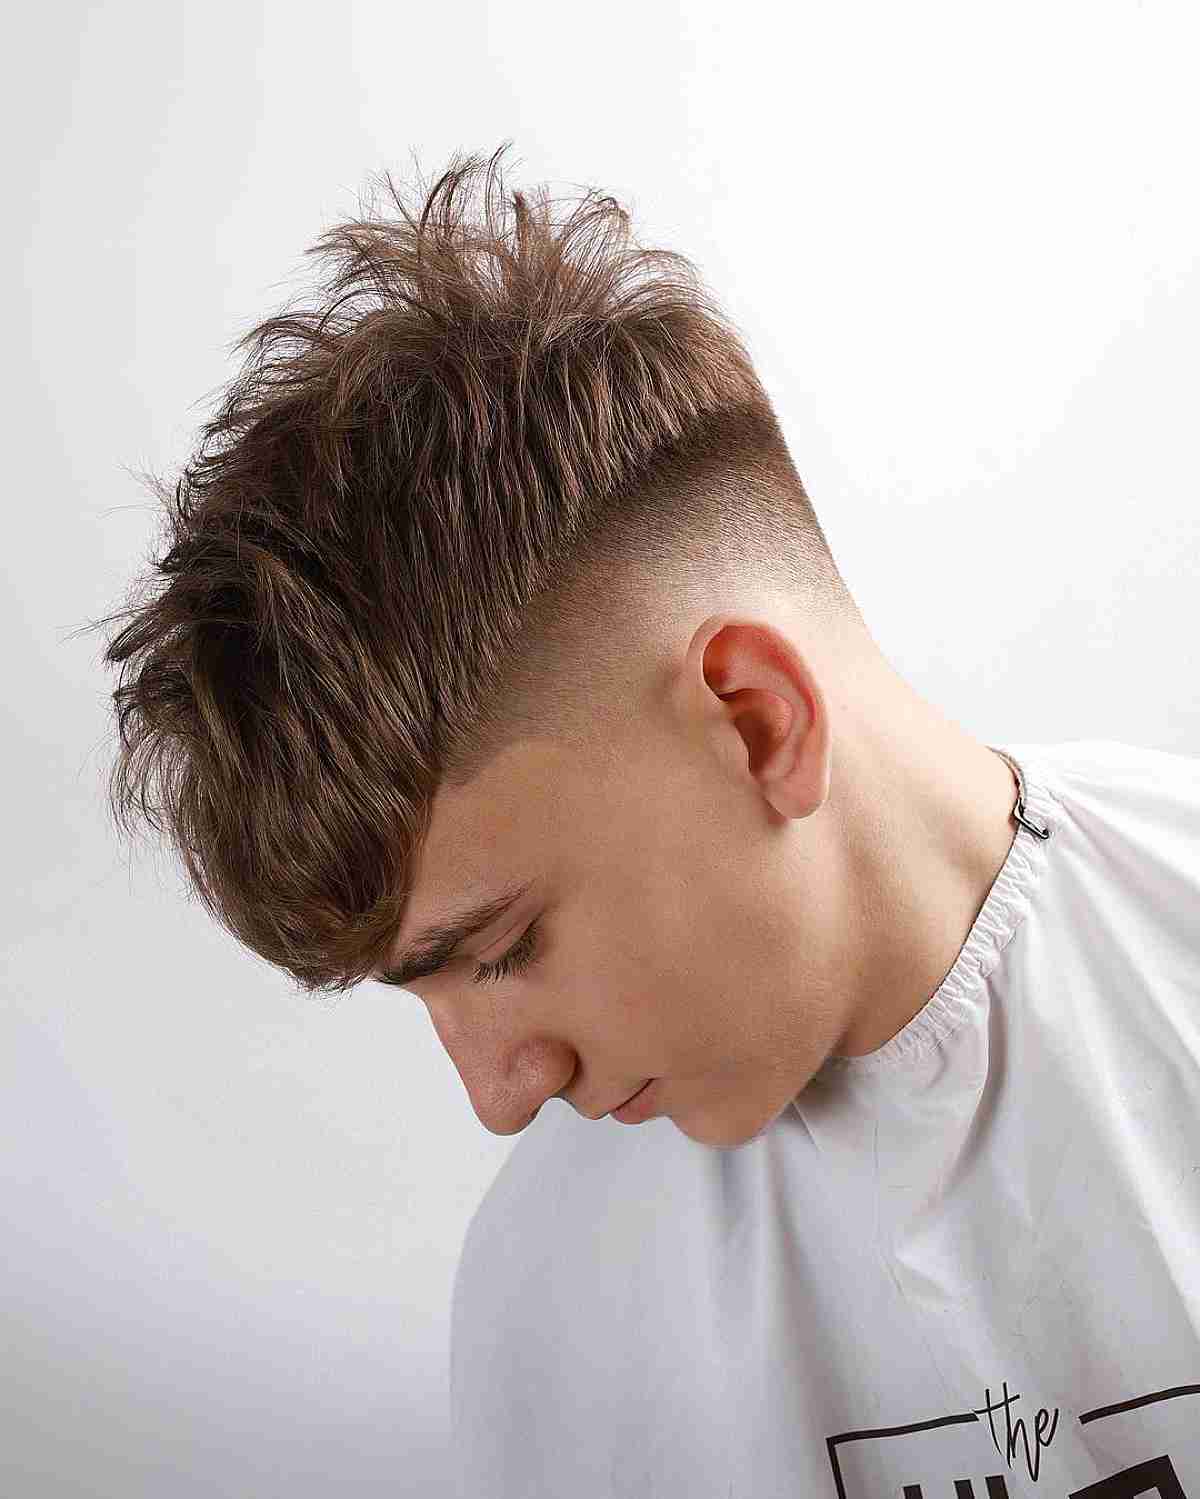 50 Impressive Medium Hairstyles For Men With Thick Hair